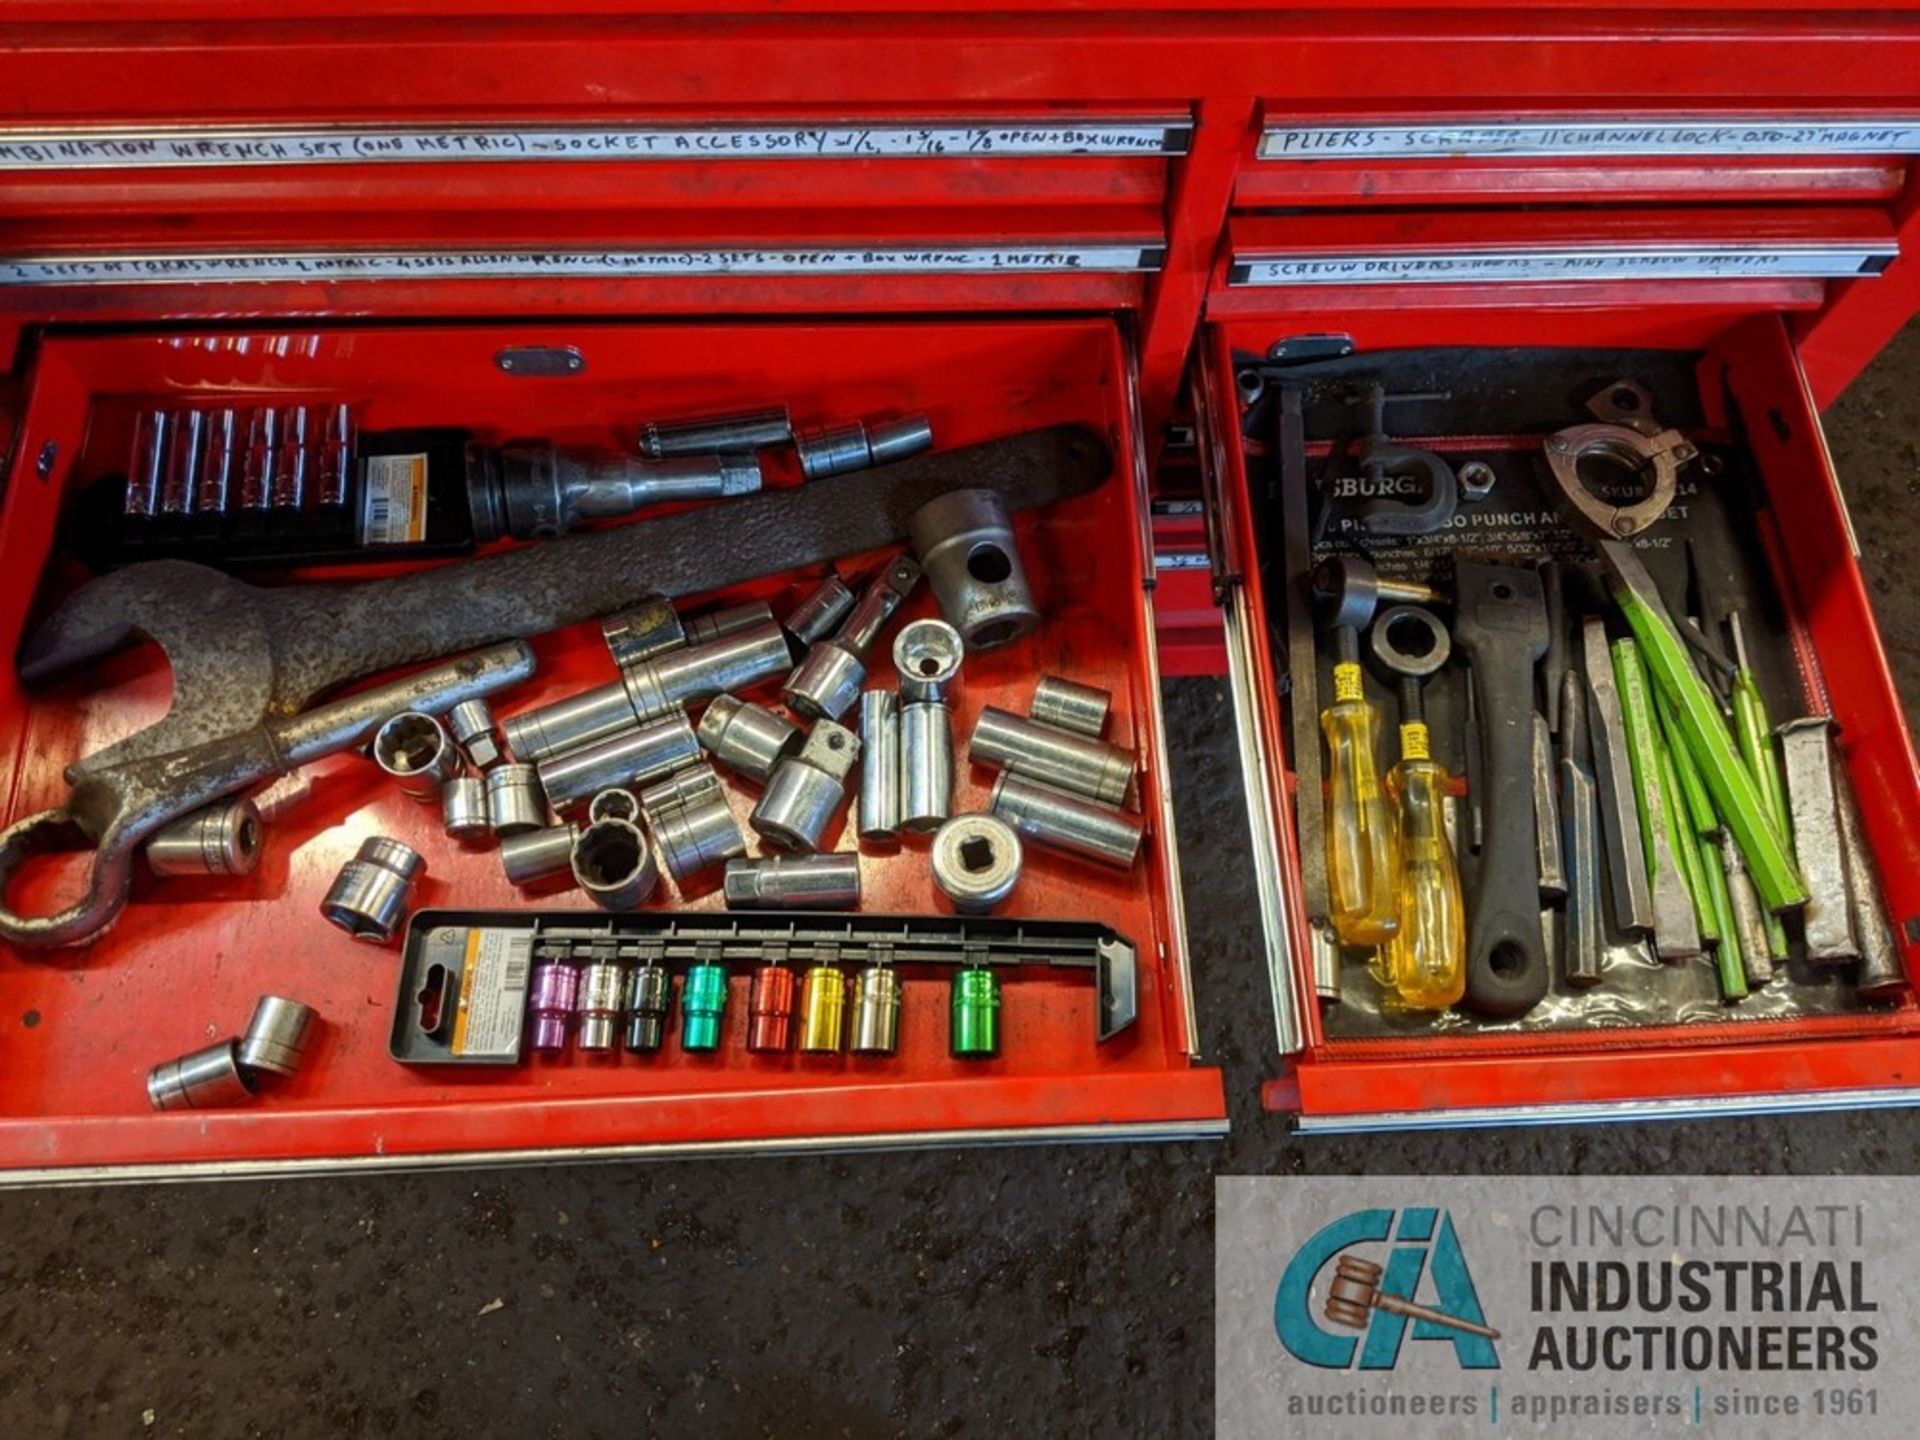 13-DRAWER US GENERAL PORTABLE TOOL BOX WITH TOOLS IN EACH DRAWER AND IMPACT SOCKETS ON RATCHETS ON - Image 7 of 10